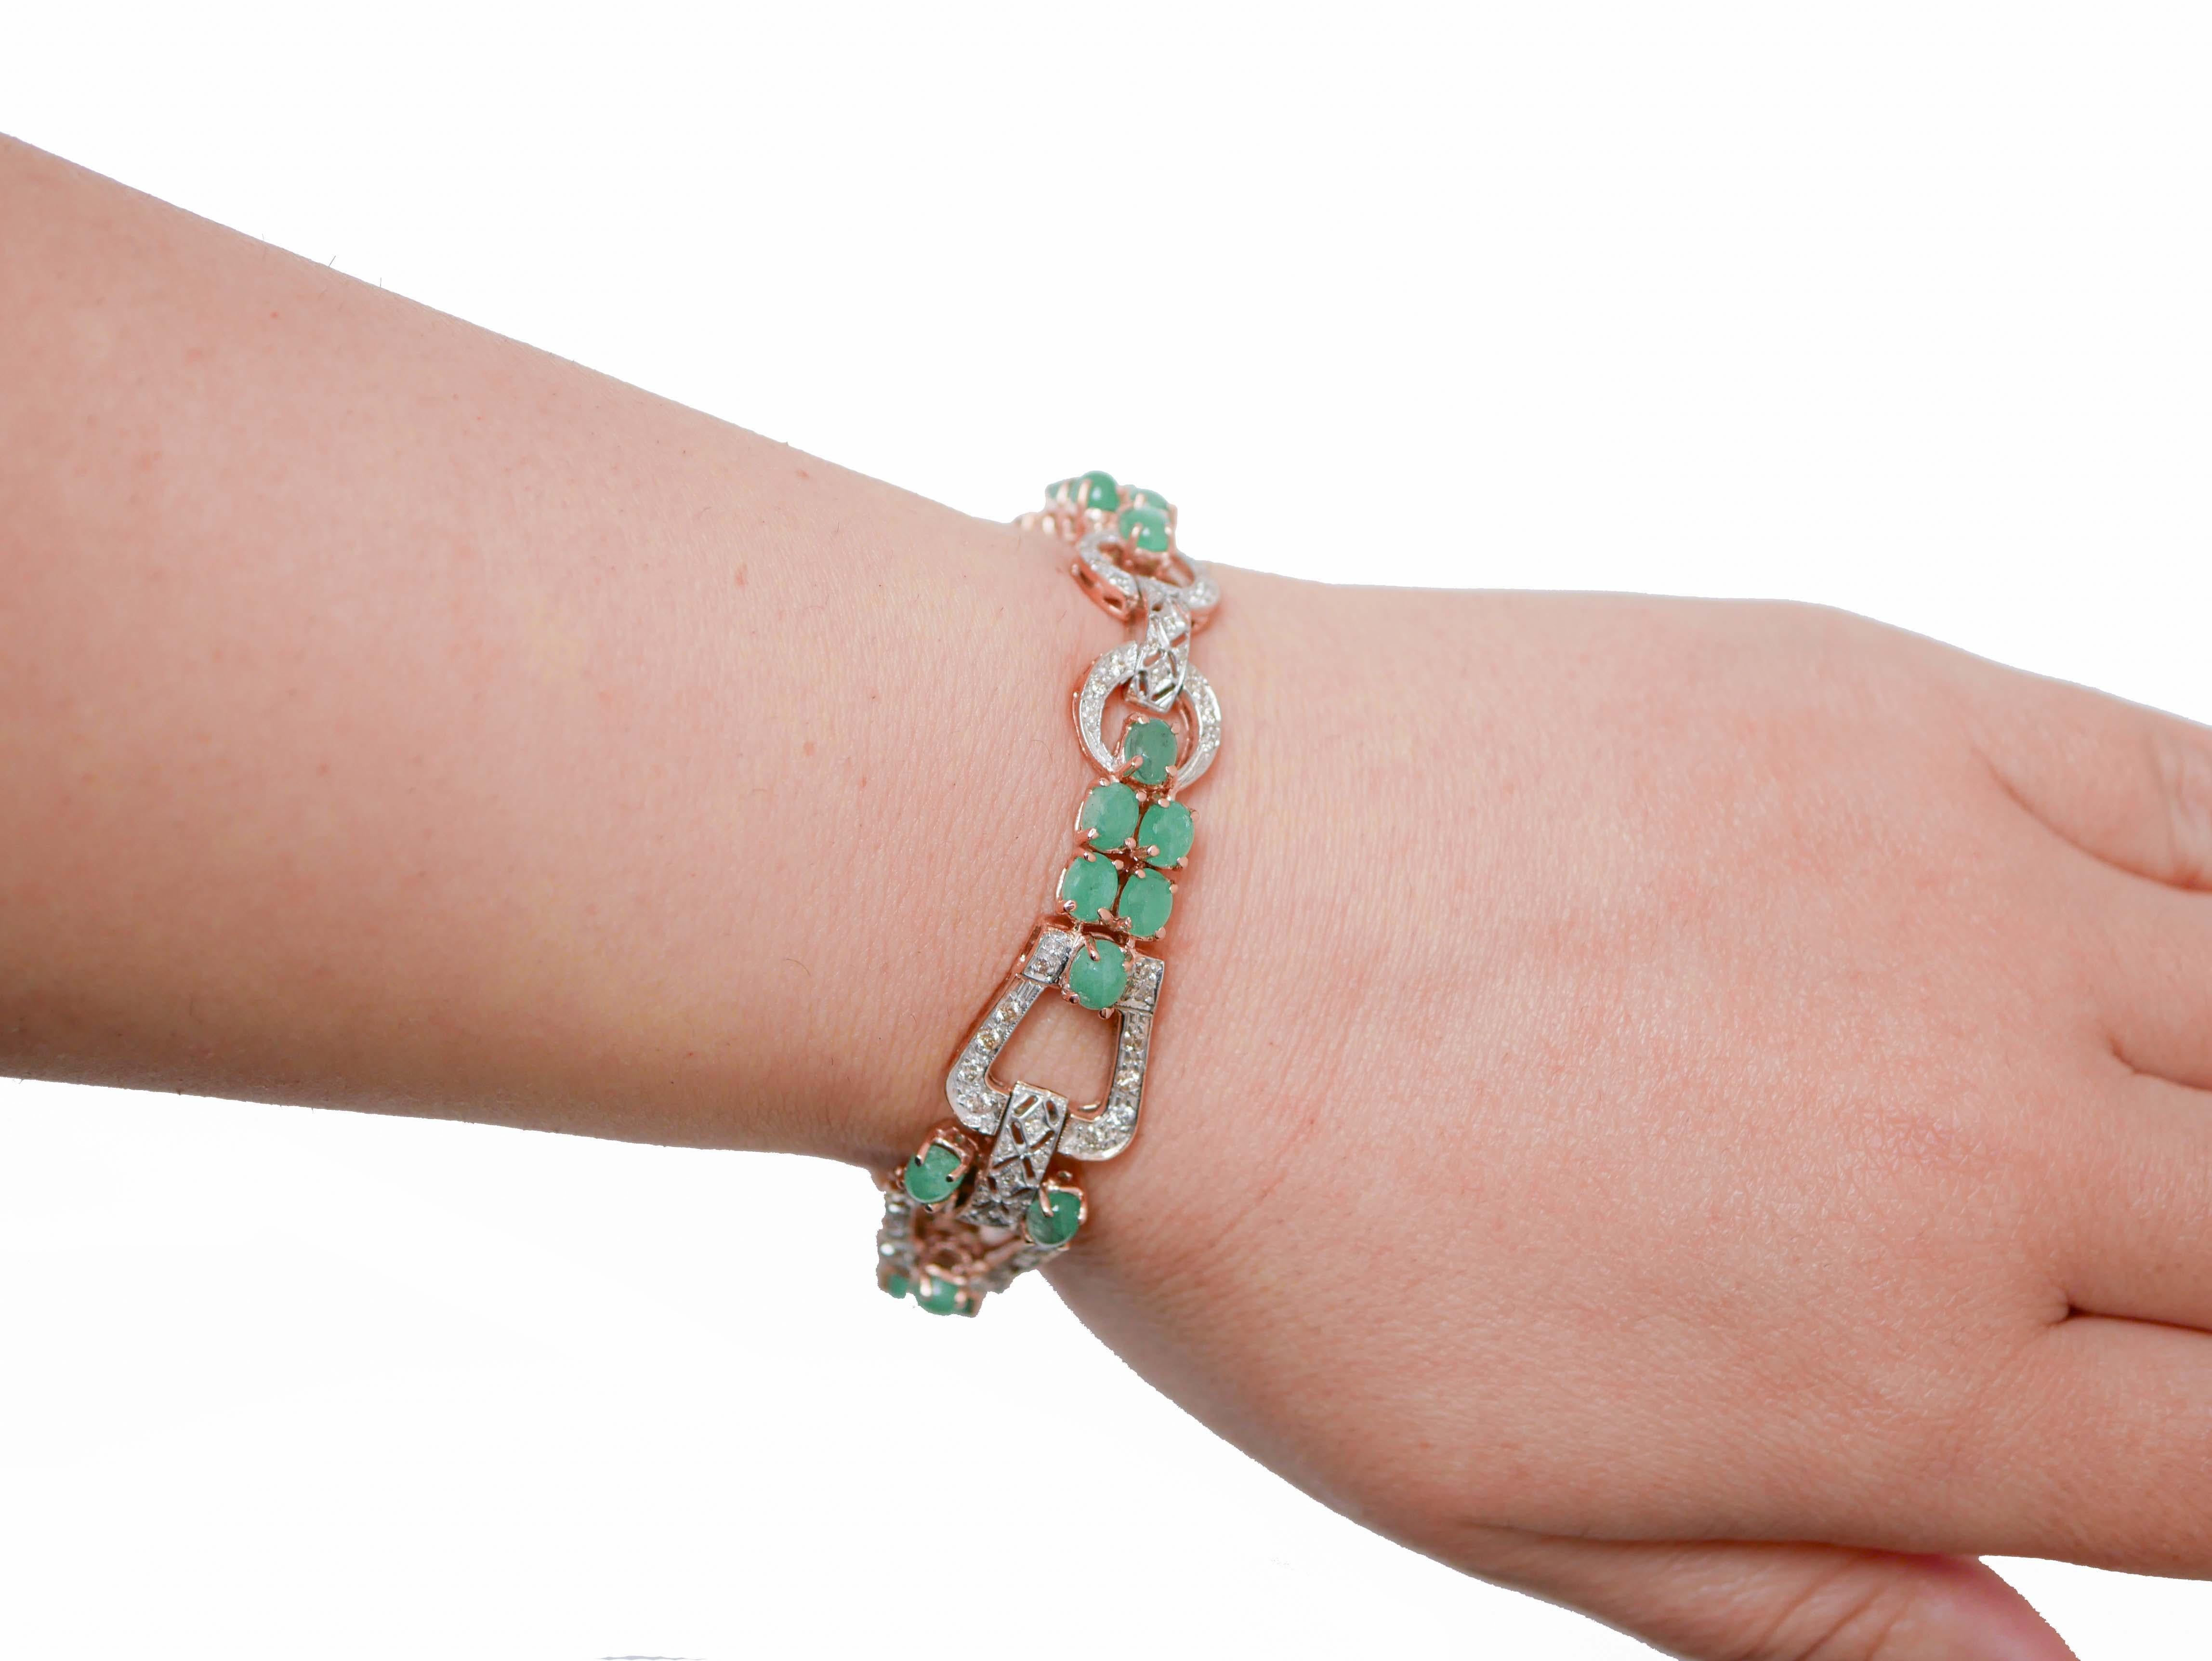 Mixed Cut Emeralds, Diamonds, Rose Gold and Silver Bracelet. For Sale